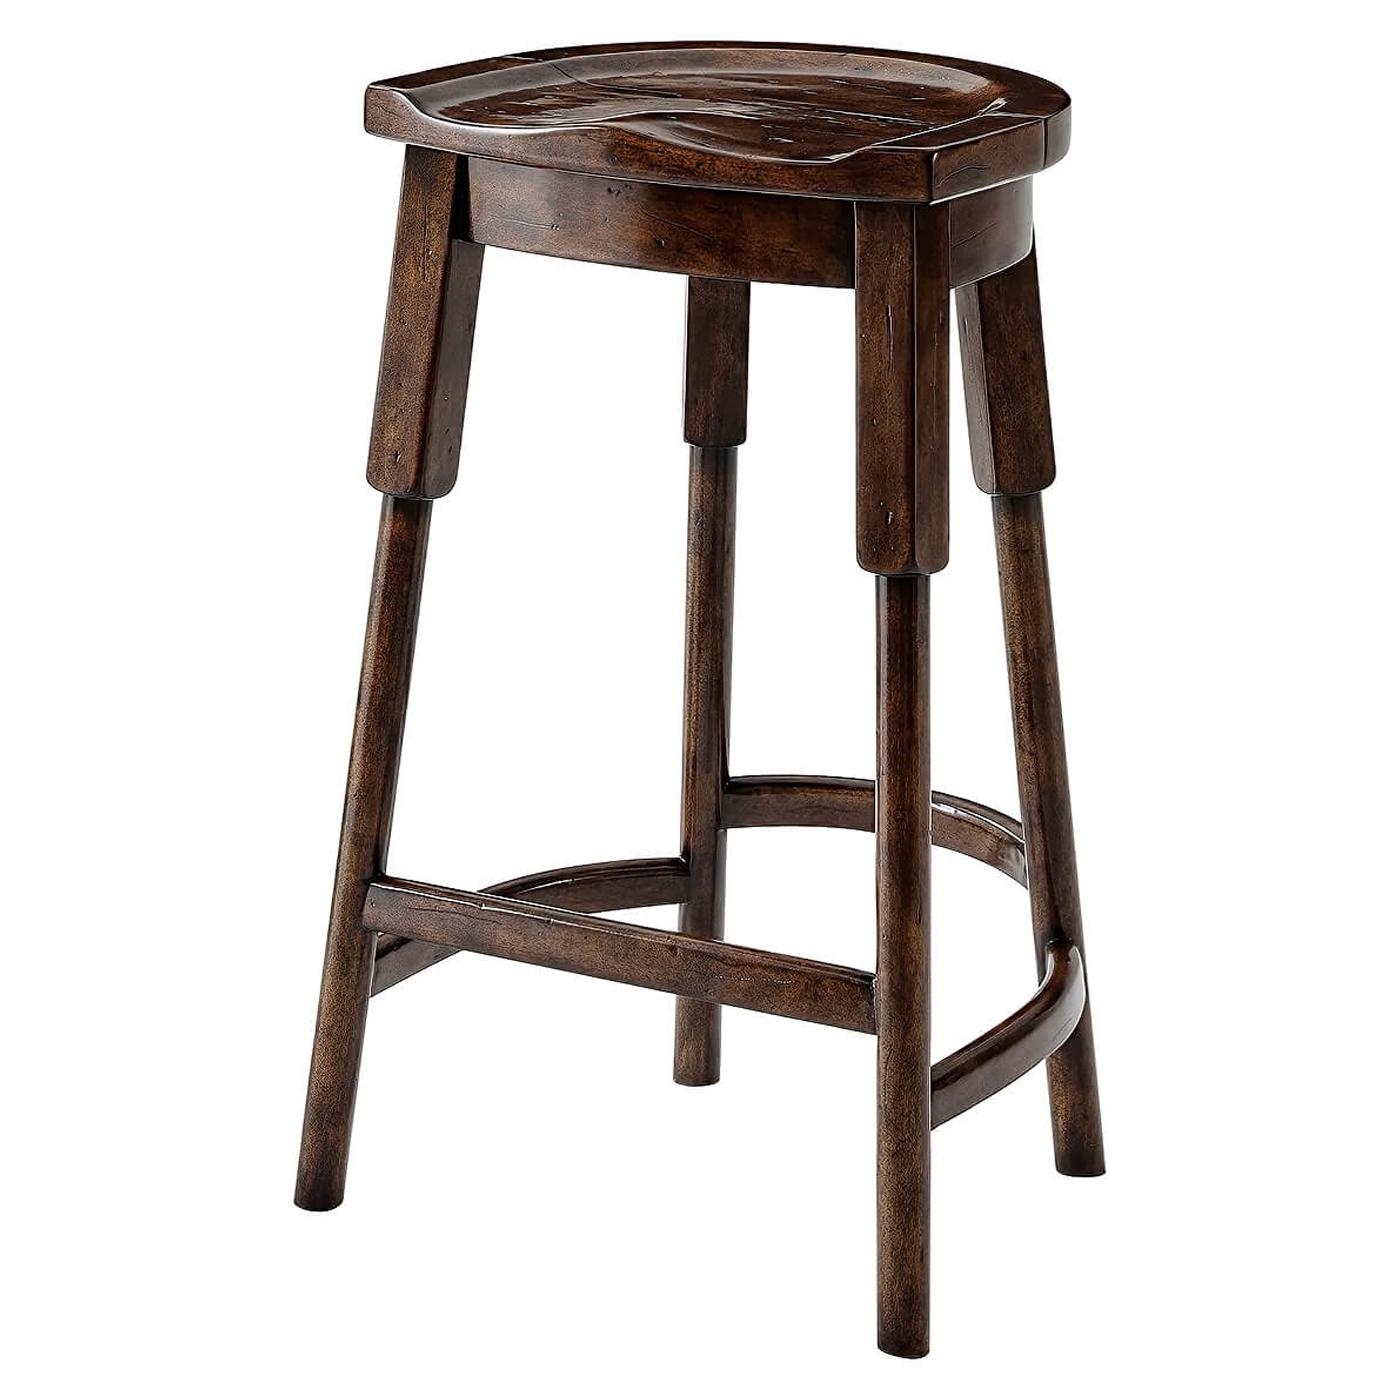 Rustic Provincial Wooden Bar Stool For Sale